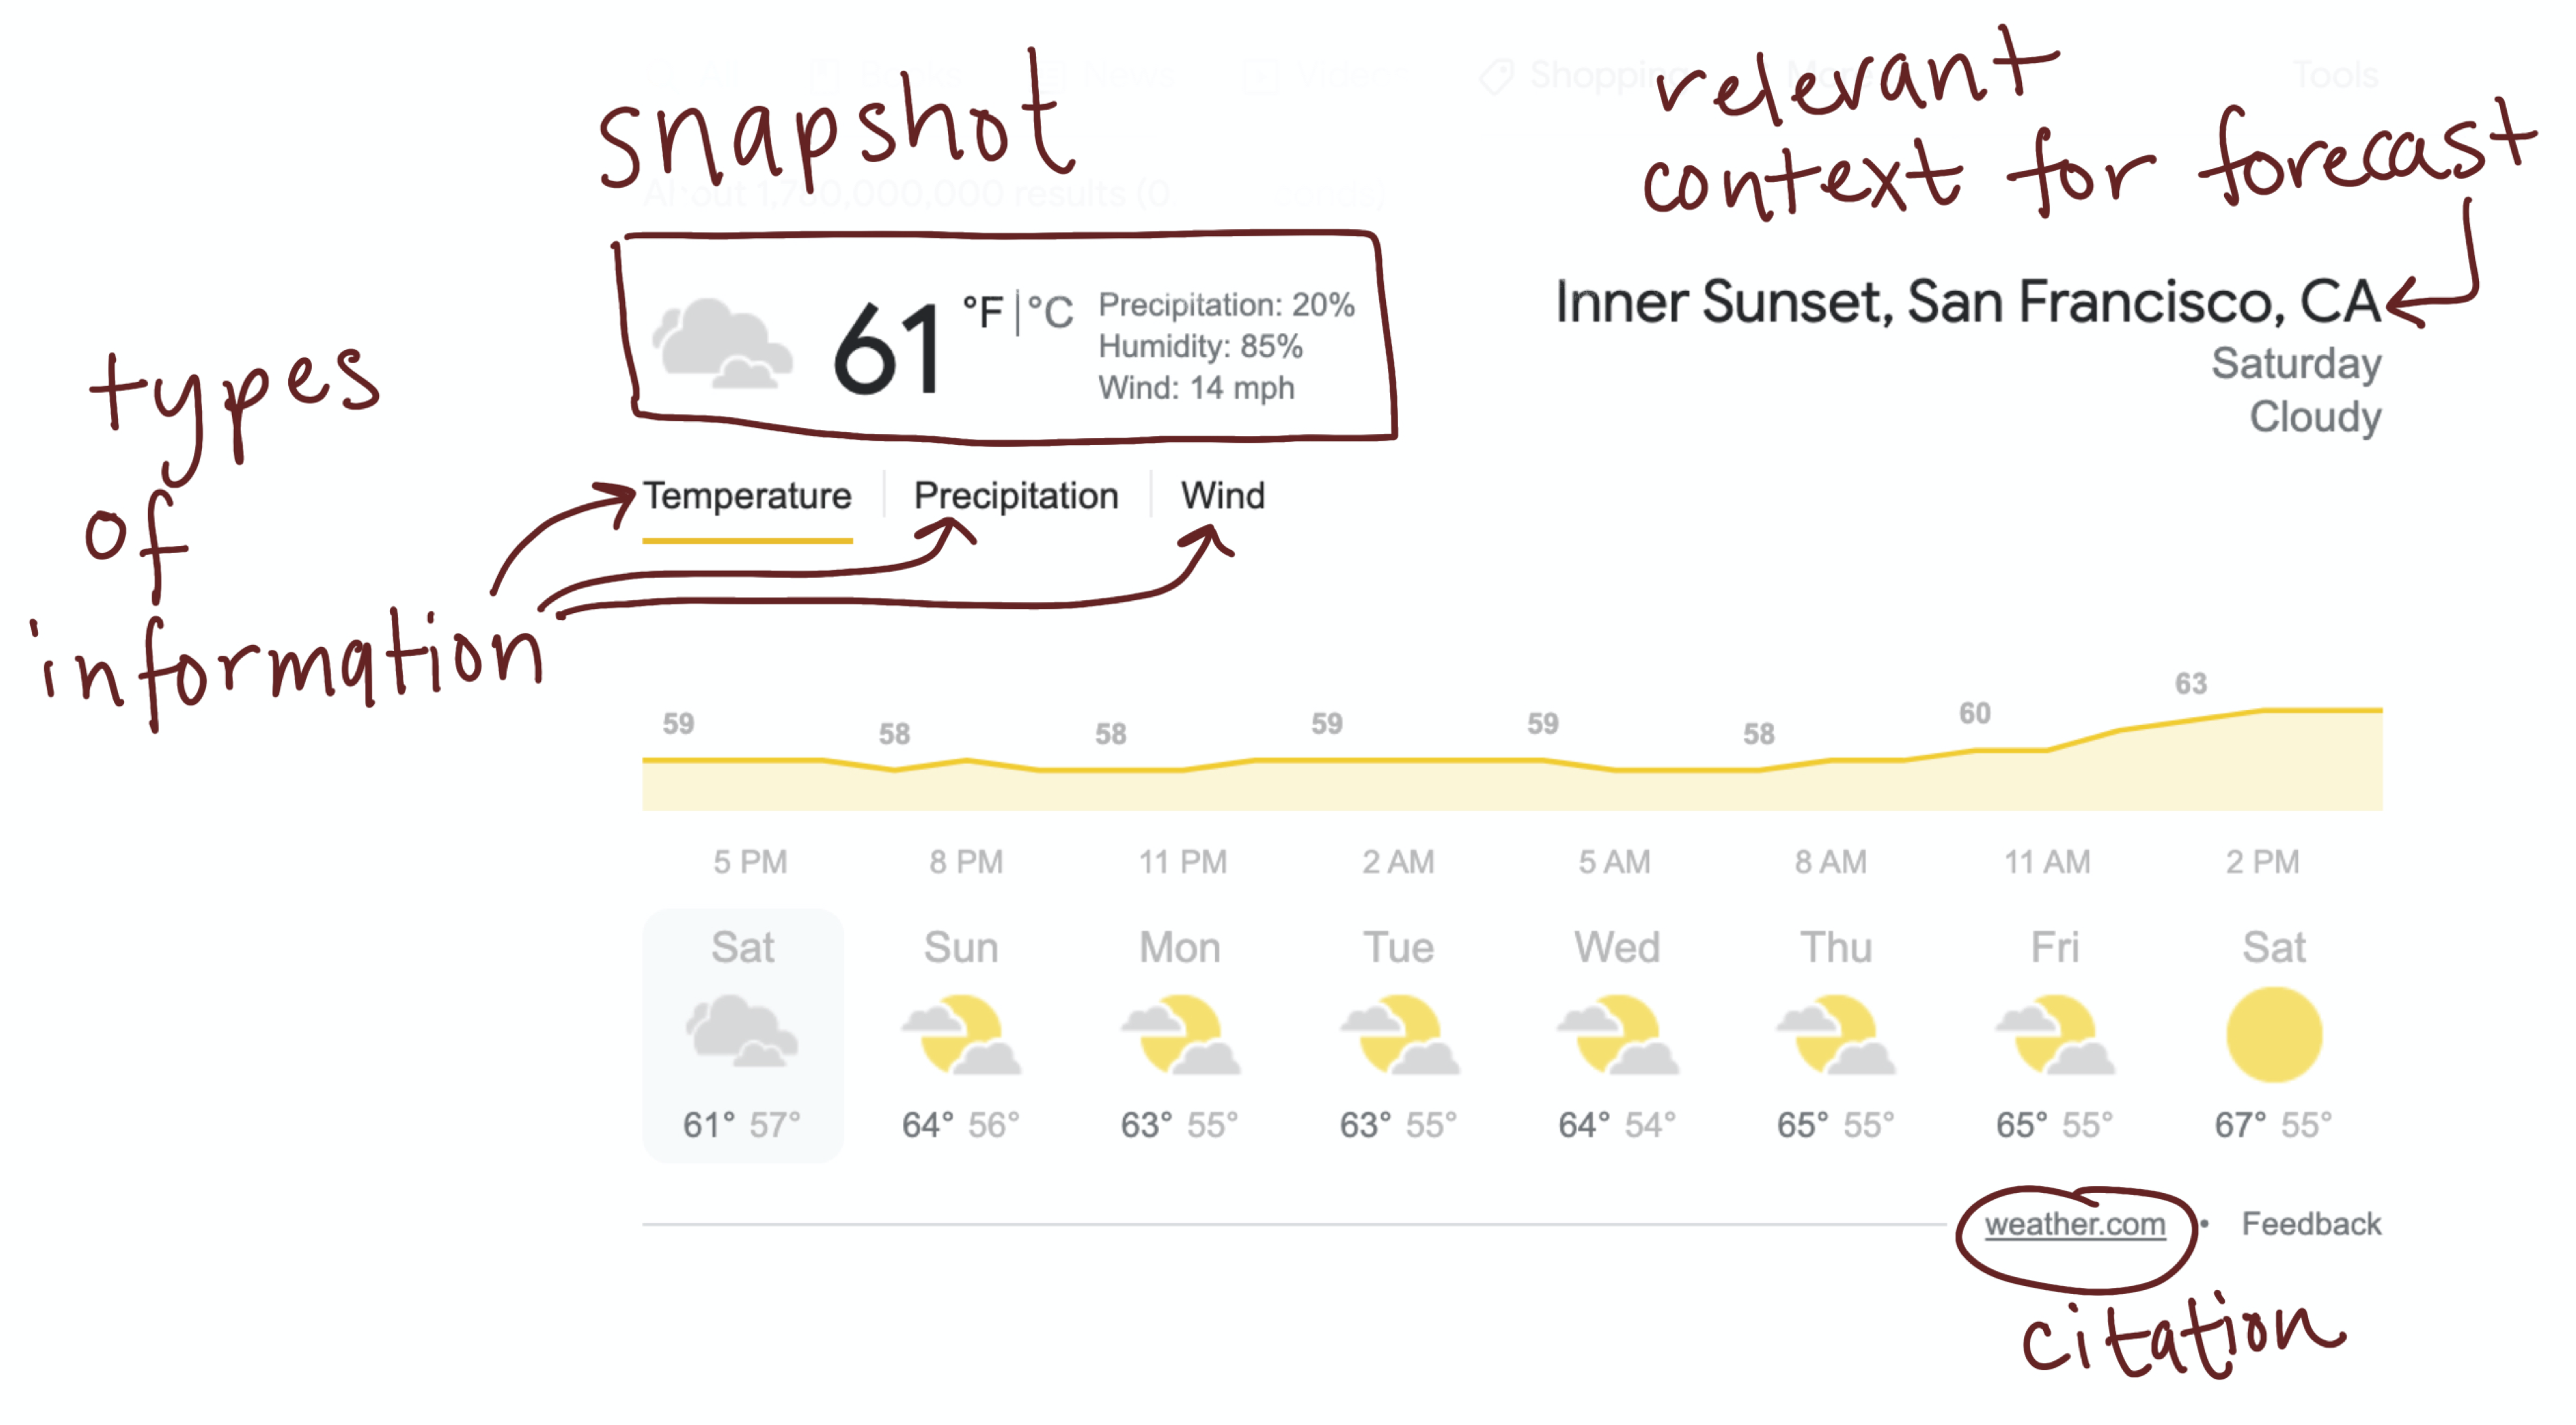 Helpful details included in the google weather forecast visualization